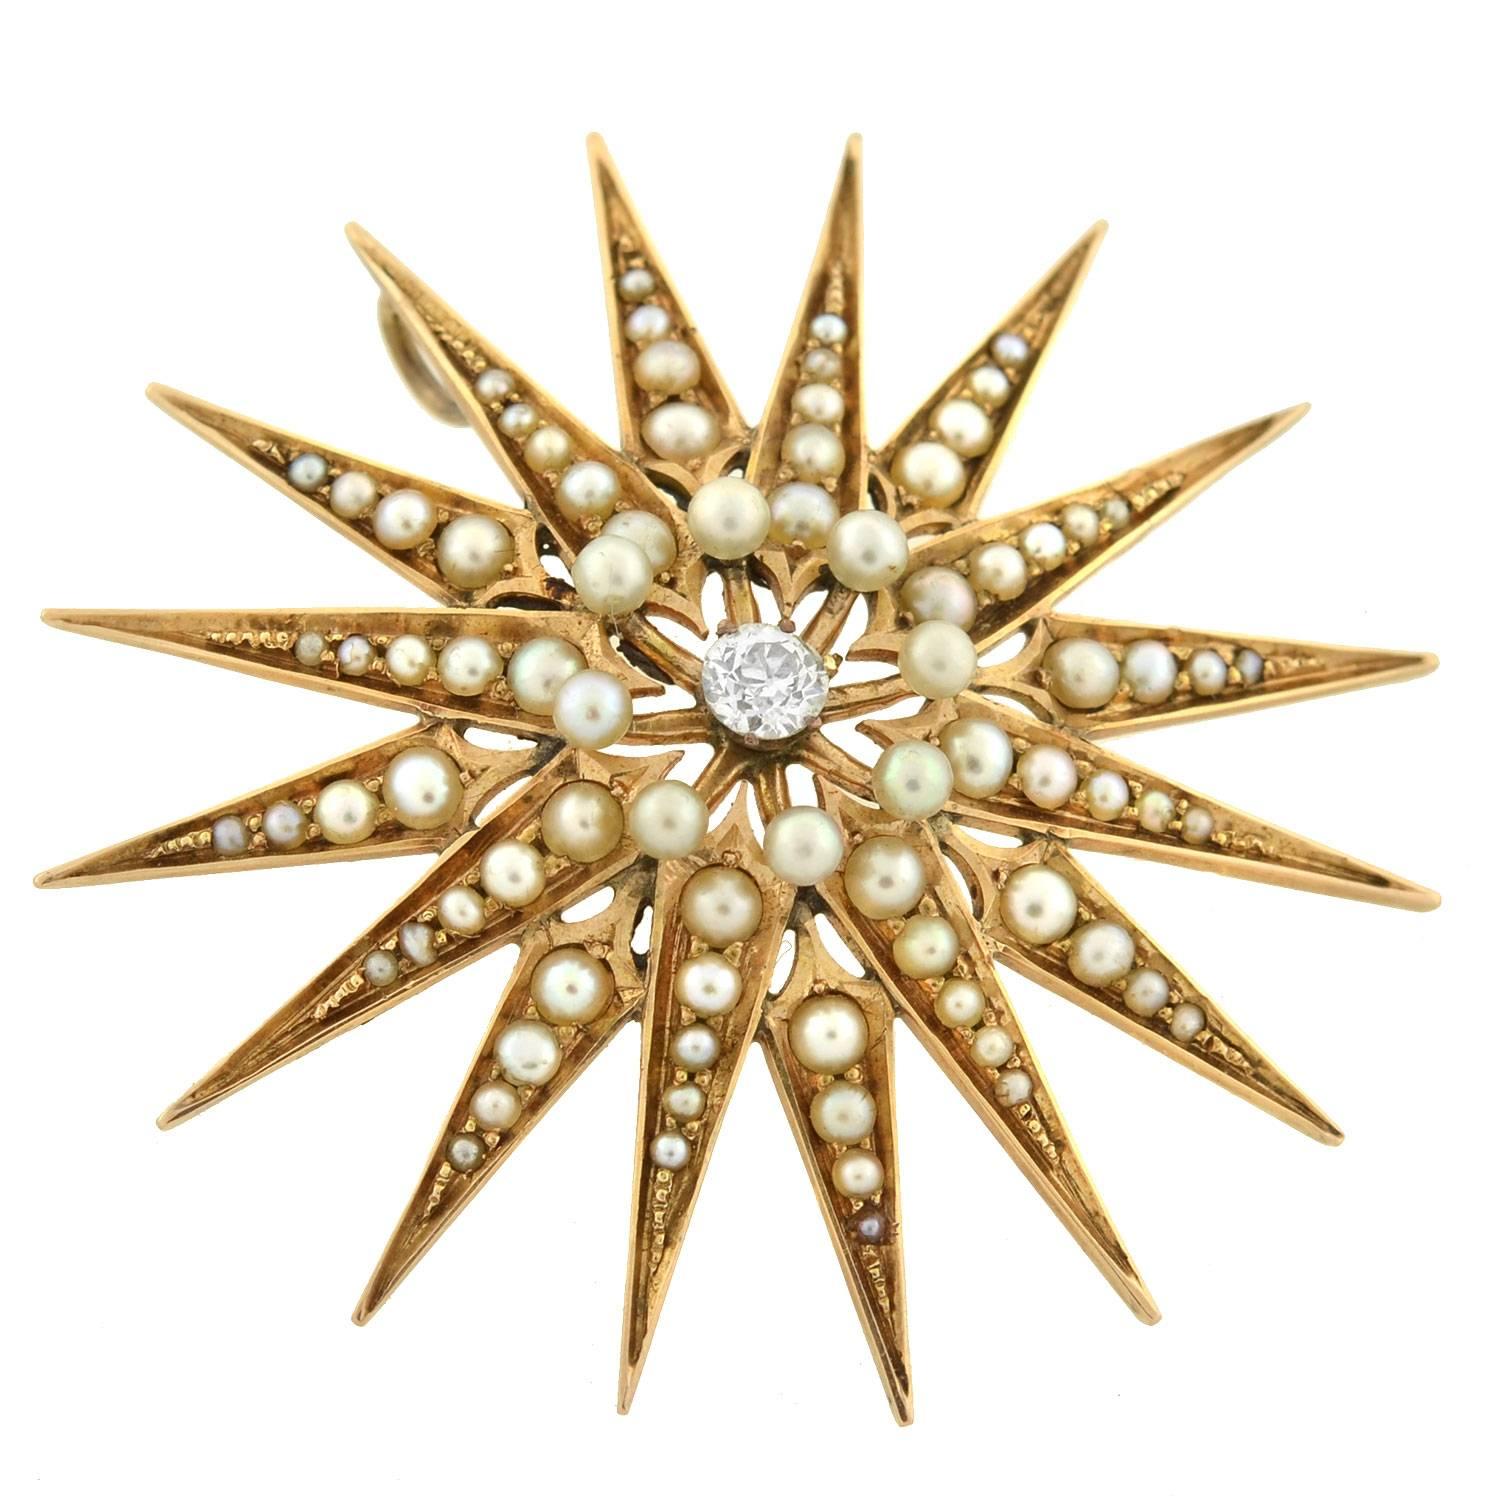 A simply stunning starburst pendant from the Victorian (ca1880) era! This gorgeous piece is crafted in 14kt yellow gold and has an impressive size and design. The beautiful 16-point starburst is lined with delicate natural pearls in a bead setting